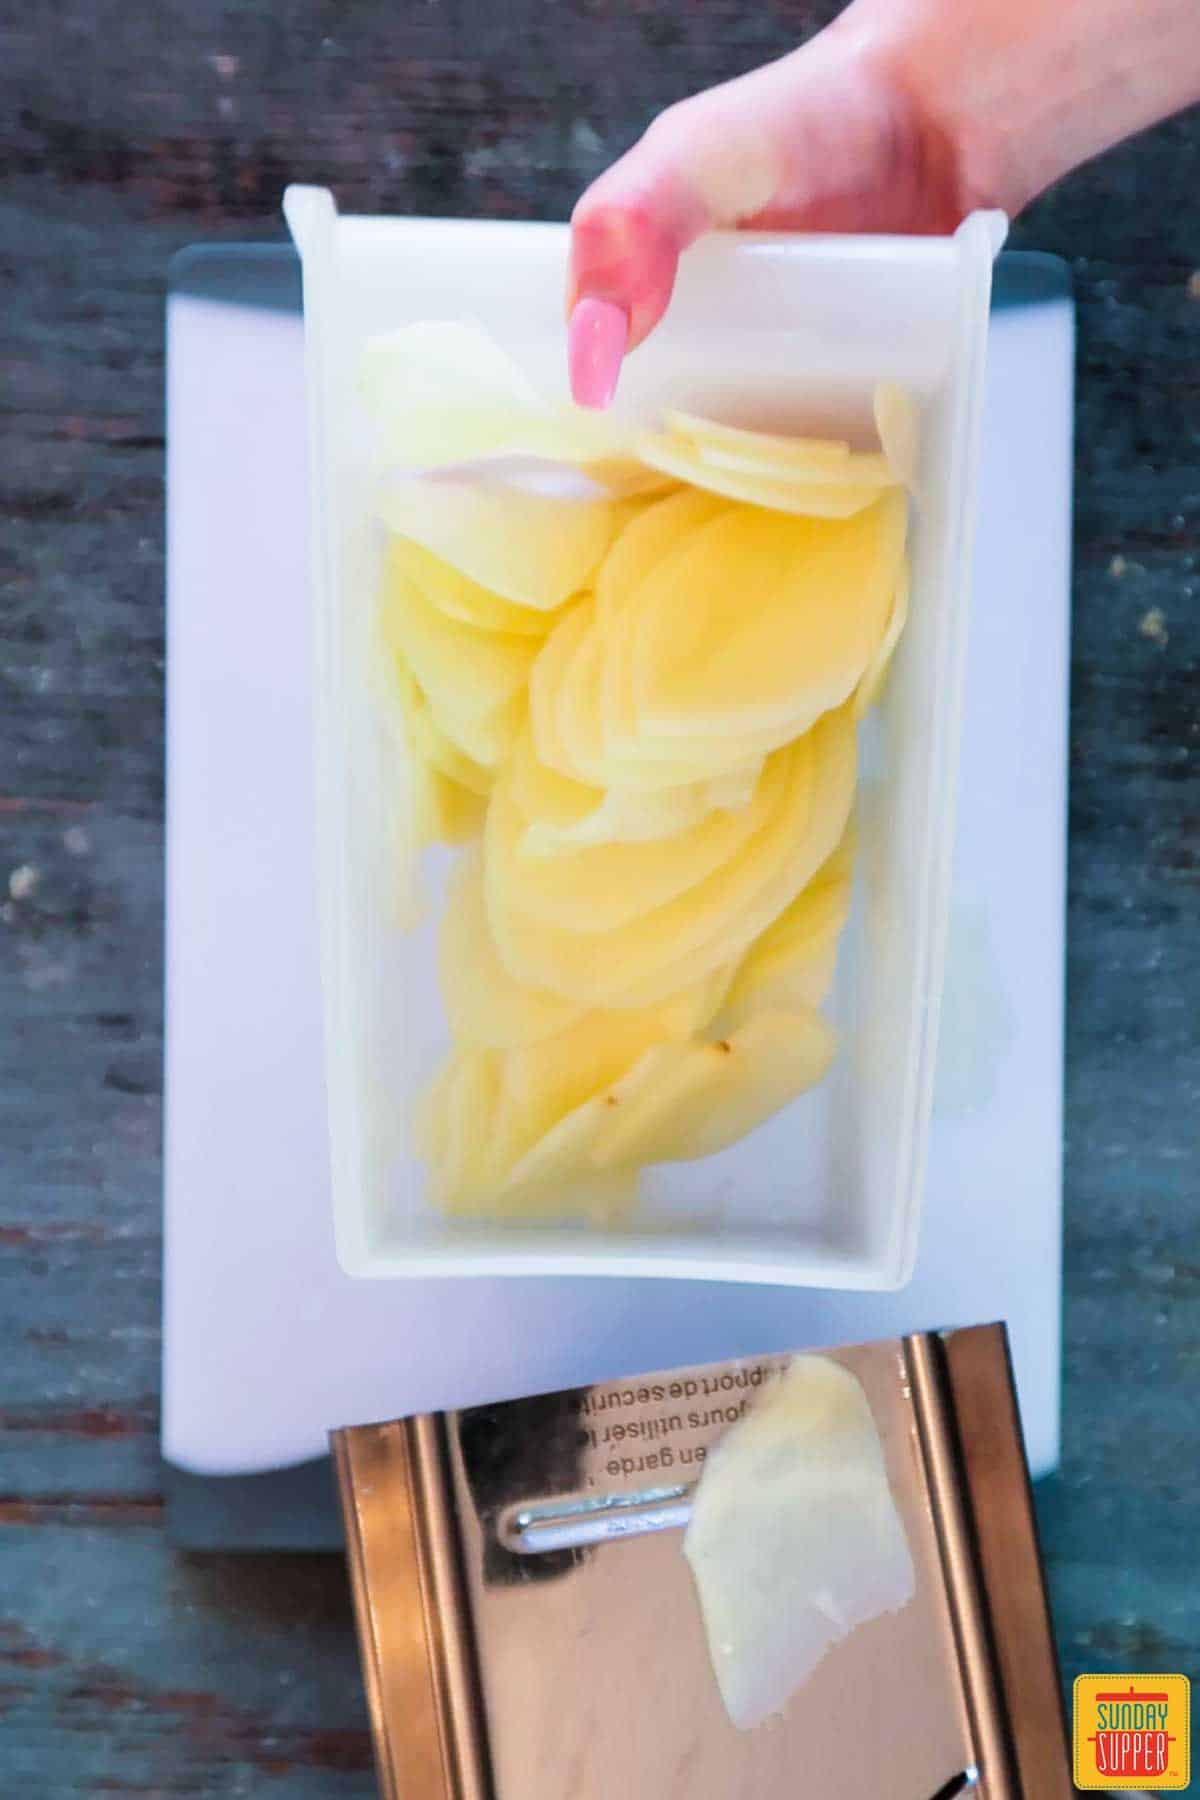 Sliced potatoes in a white dish on a cutting board